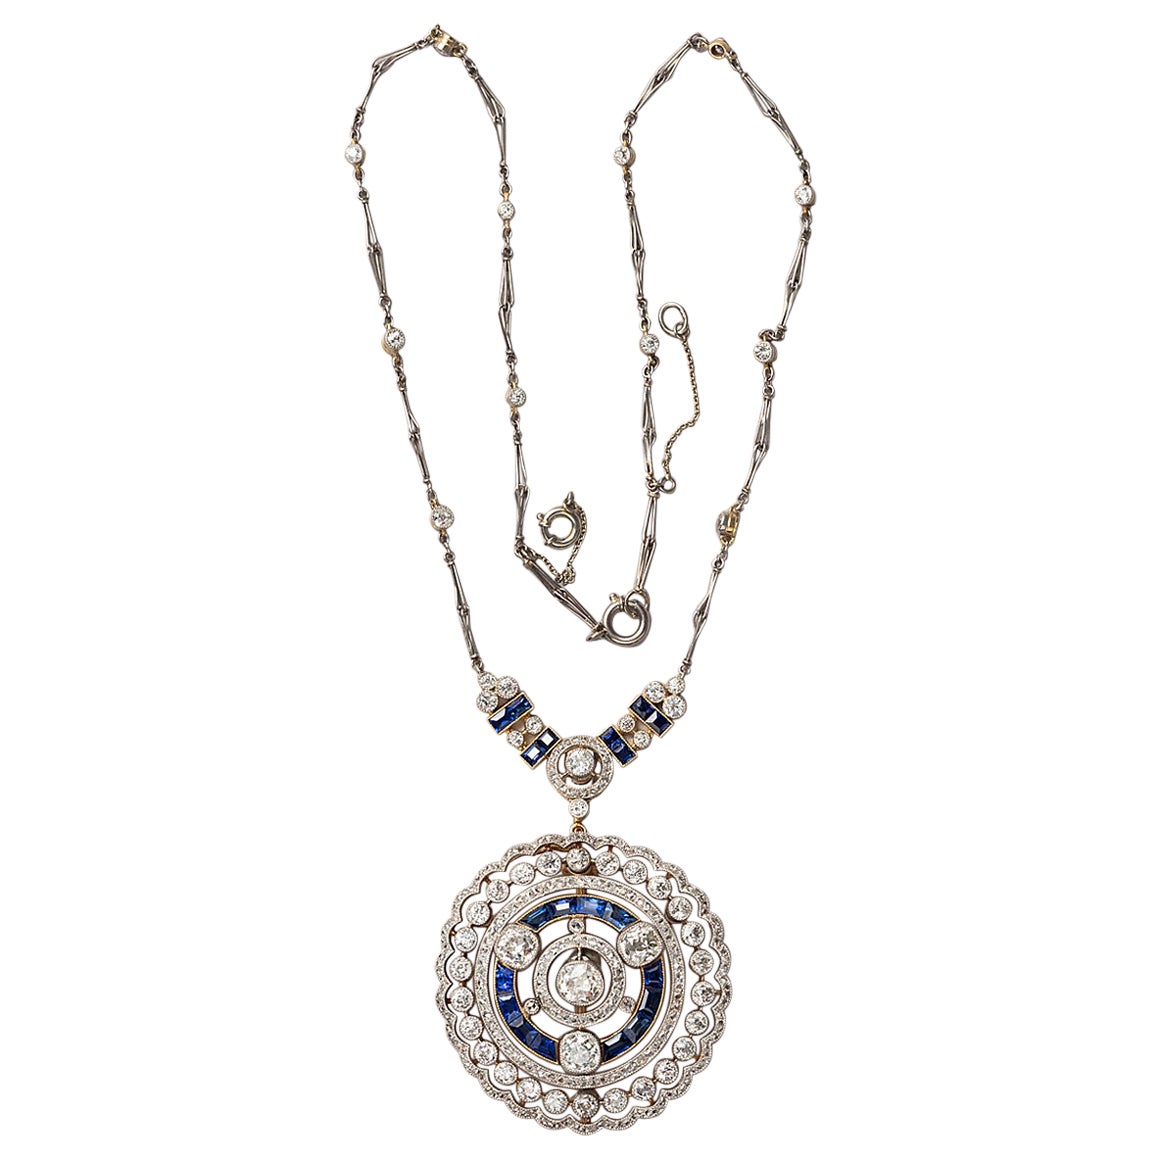 A Diamond and Sapphire necklace or Pendant or Brooch